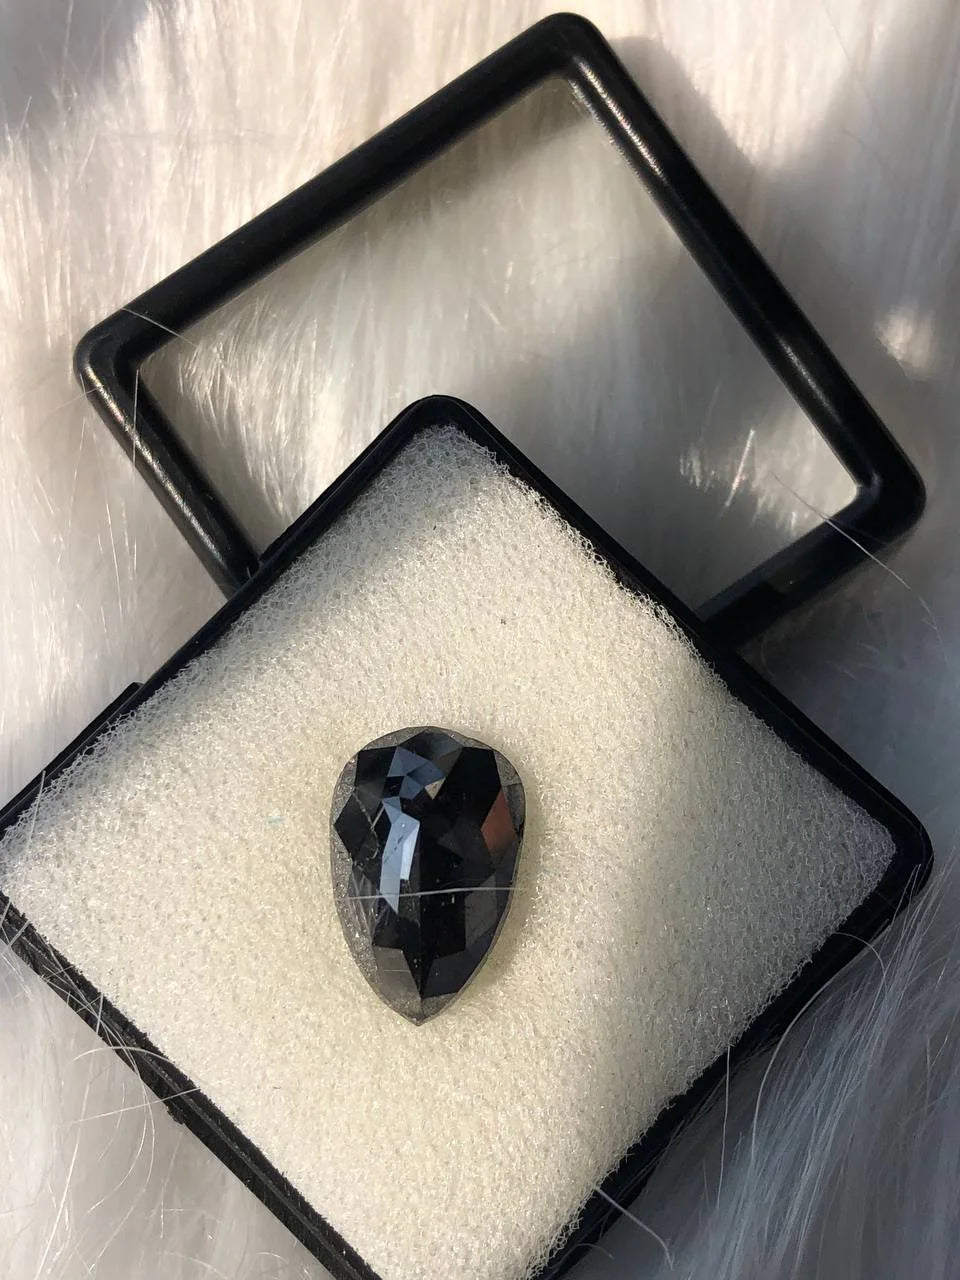 8 Ct Natural Pear Shape Black Diamond a Stunning Centerpiece for Jewelry Design